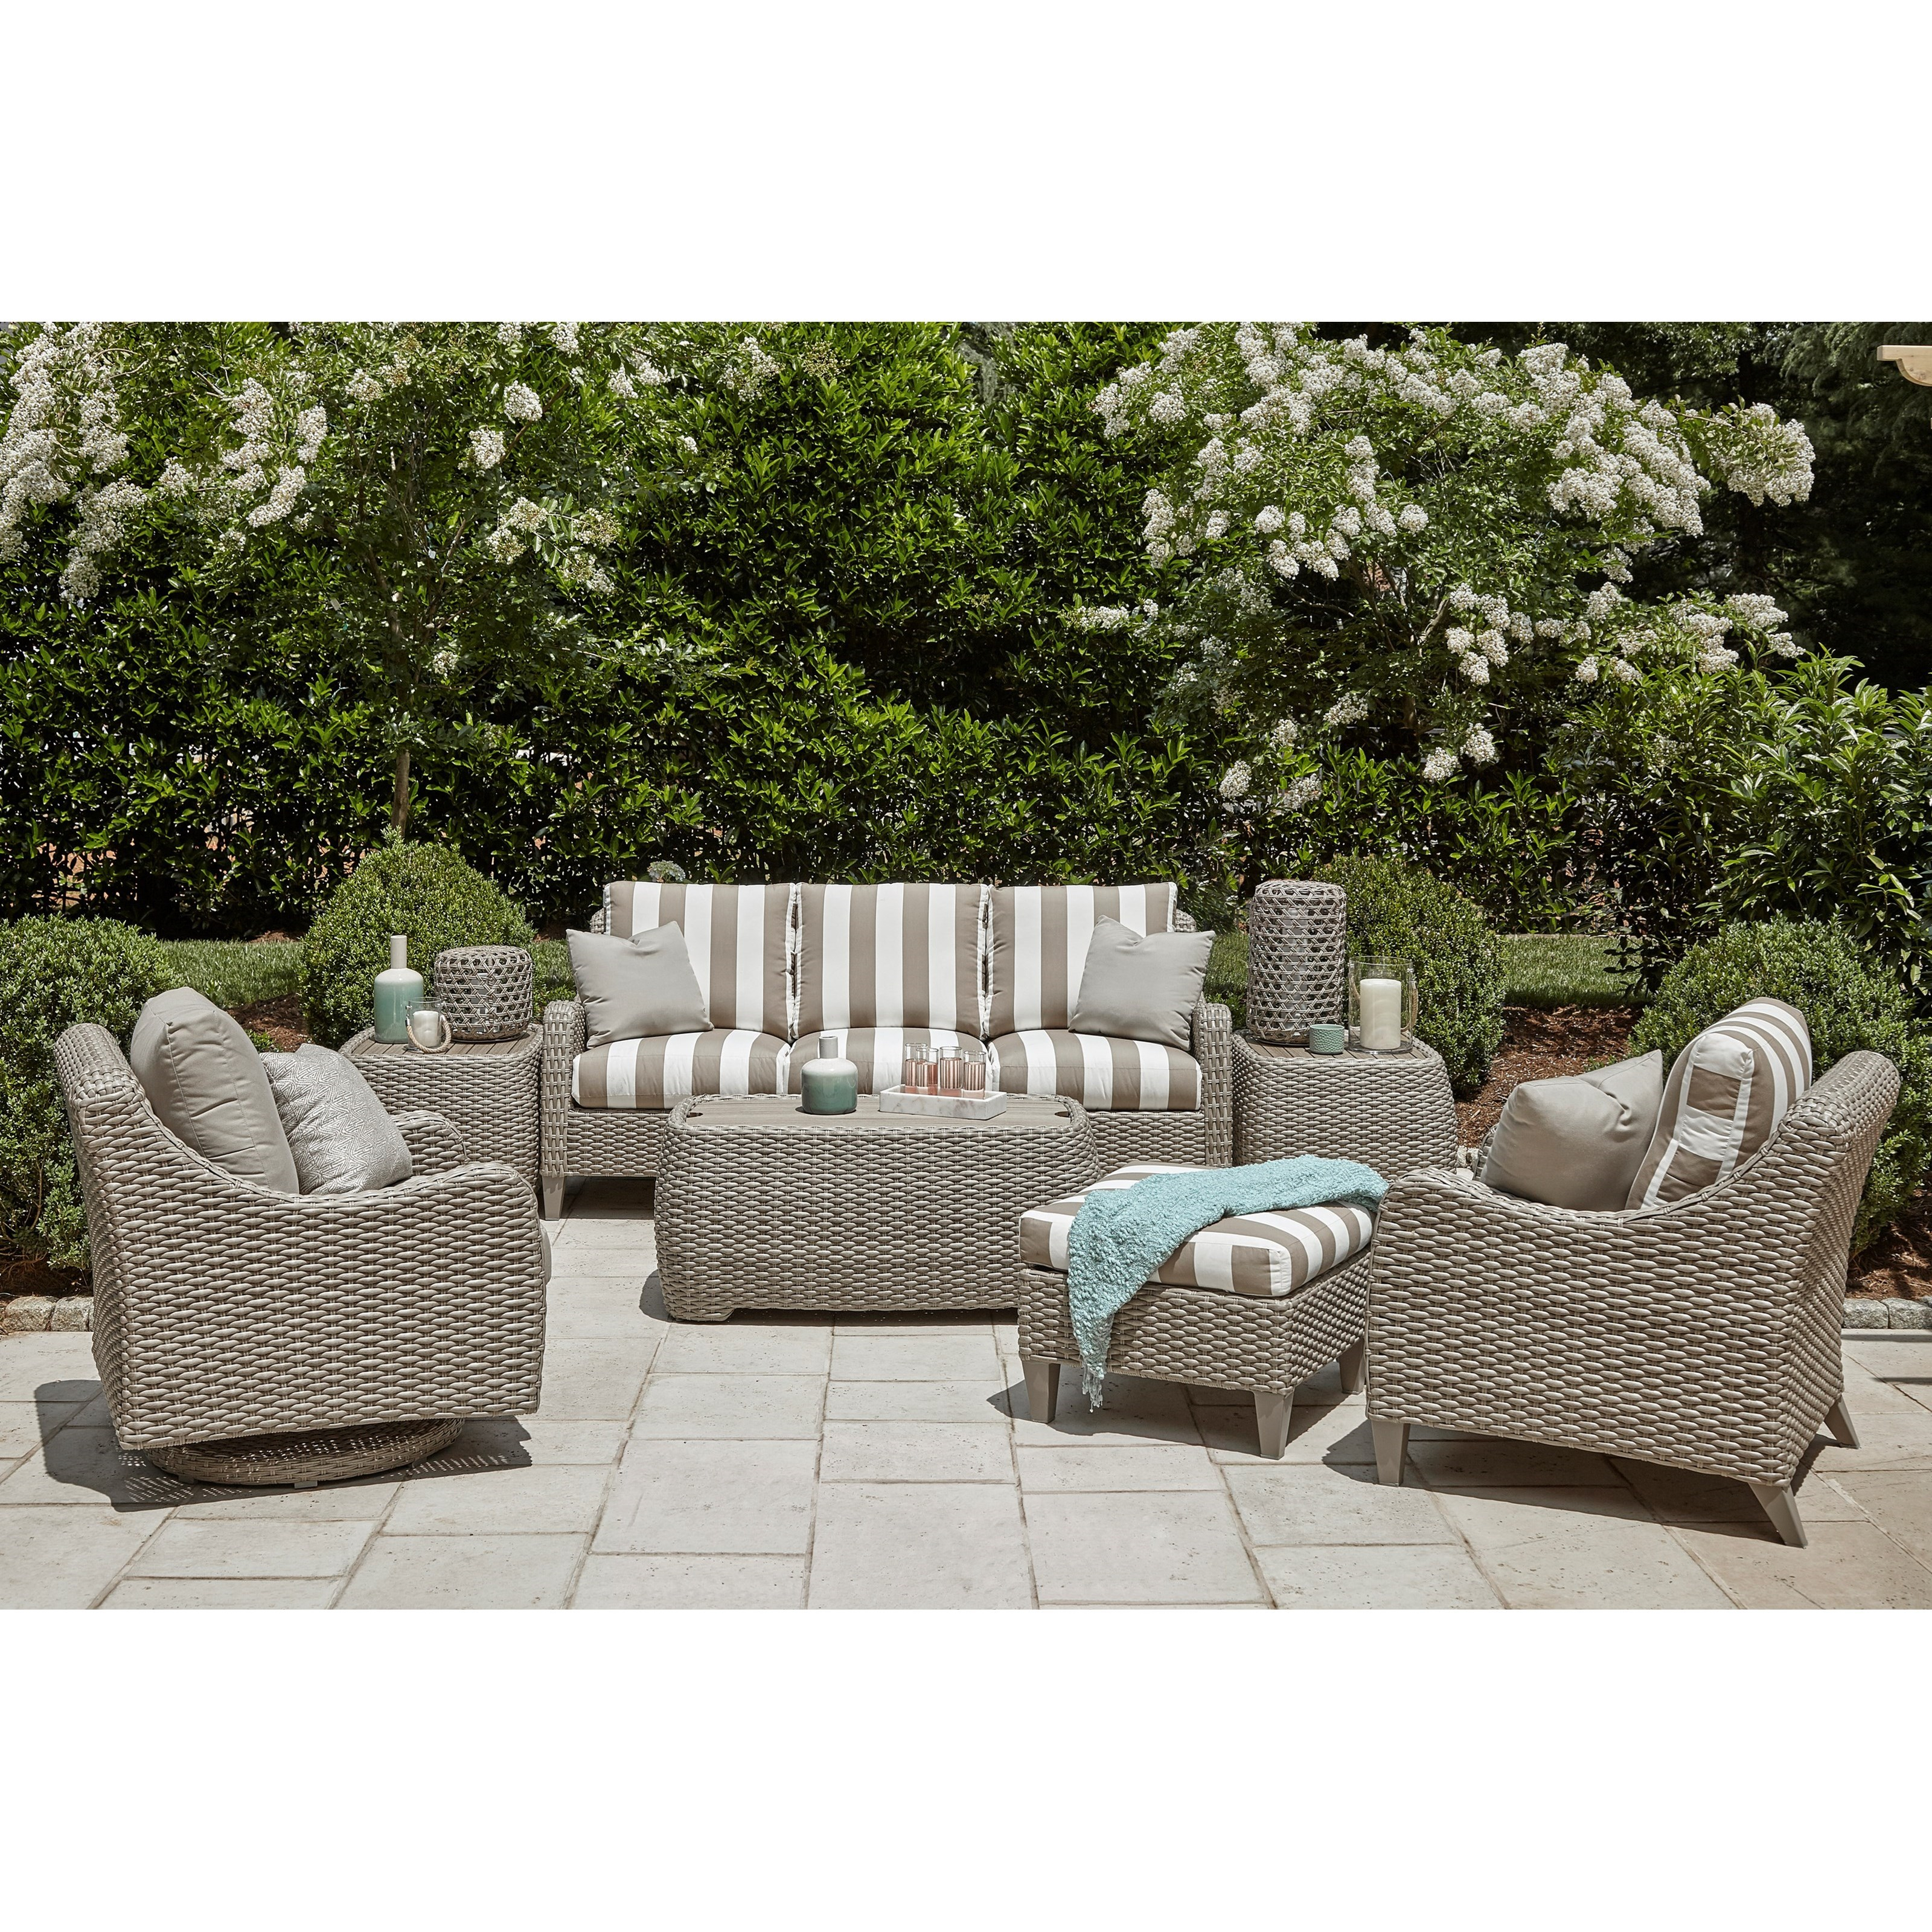 Klaussner Outdoor Mesa Outdoor Chat Set With Reversible within dimensions 3200 X 3200